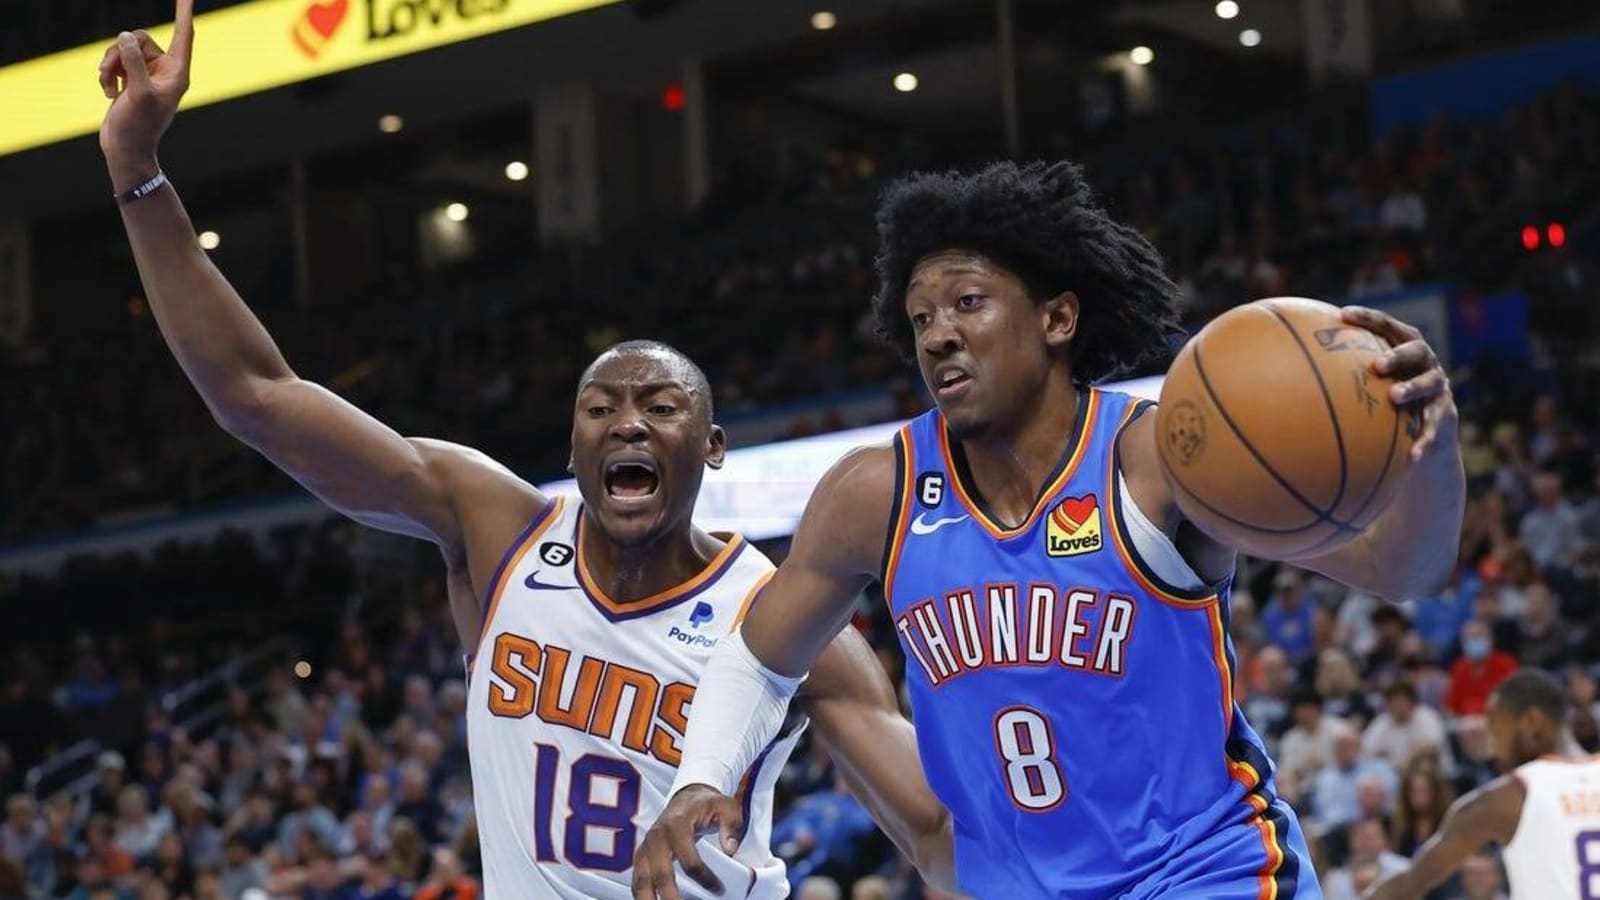 Kevin Durant (35 points), Suns fend off Thunder